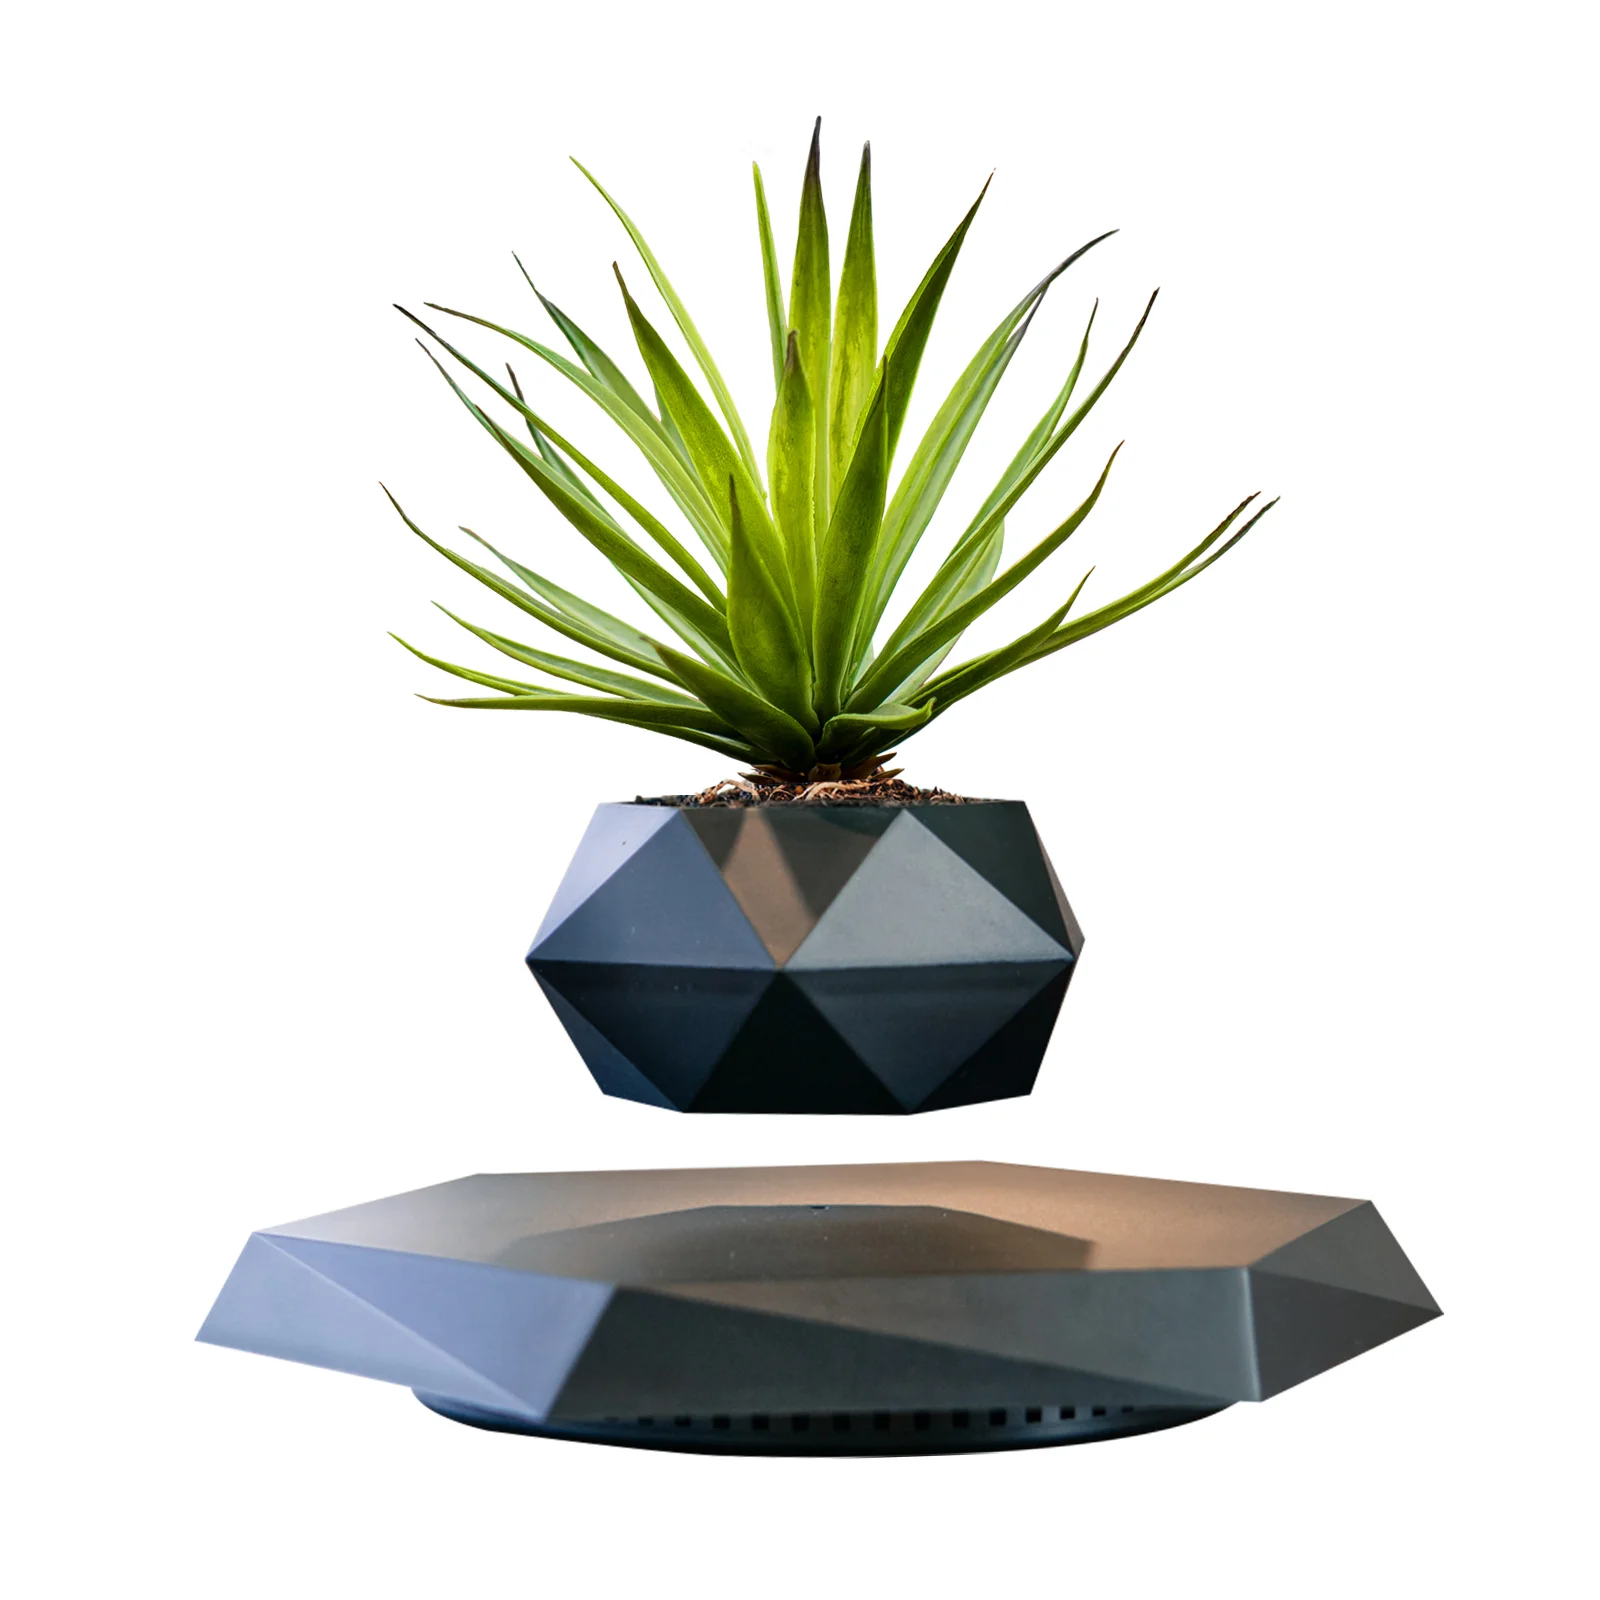 

Hot Selling Air Bonsai Magnetic Levitating Flower Pot Floating Plant Pot Creative Gifts For Home Decoration